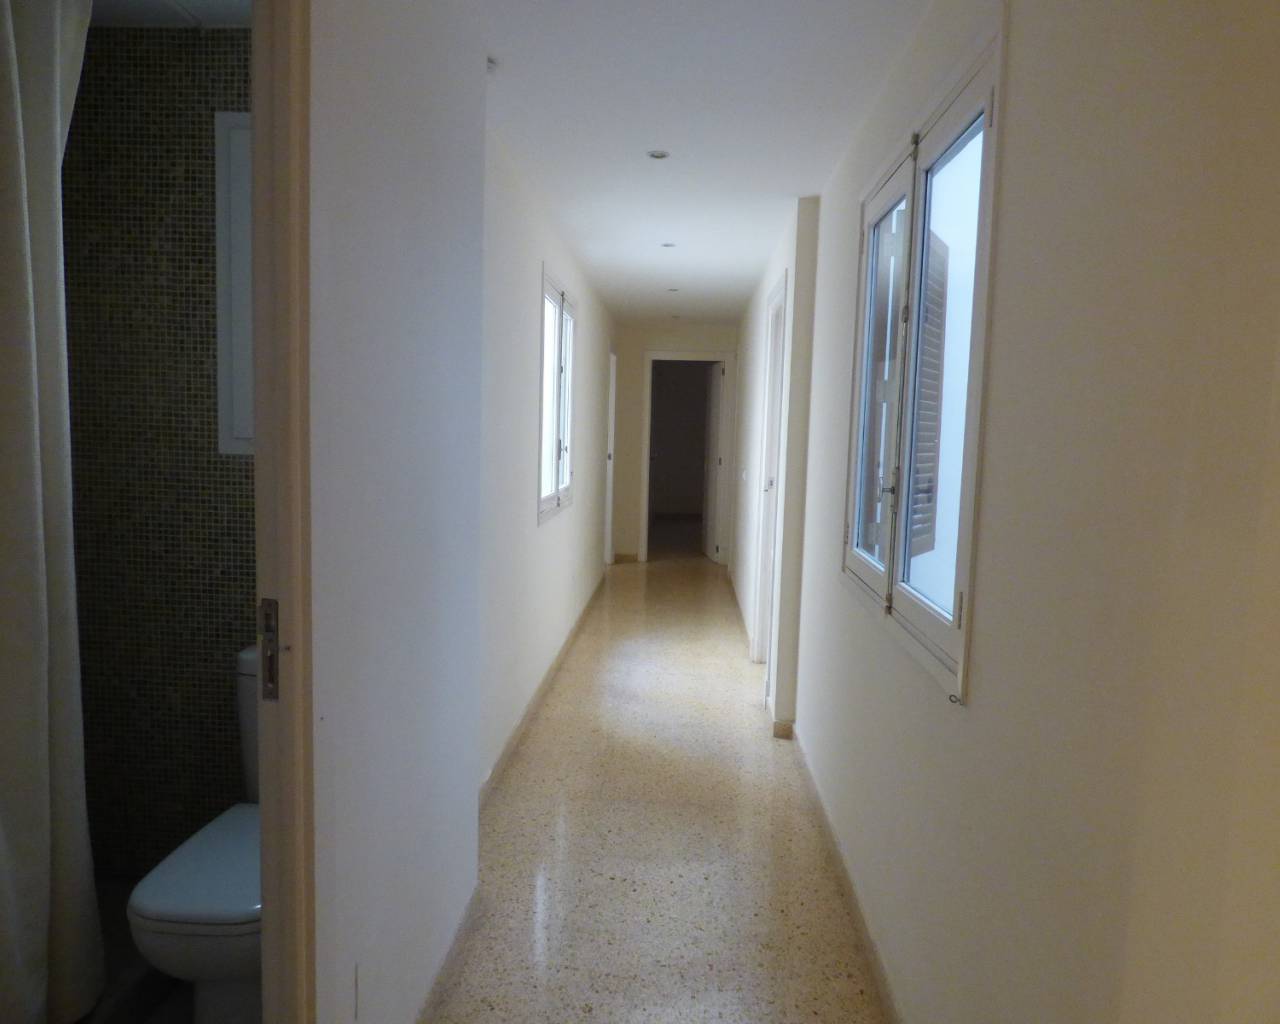 Property for rent in Palma,Mallorca